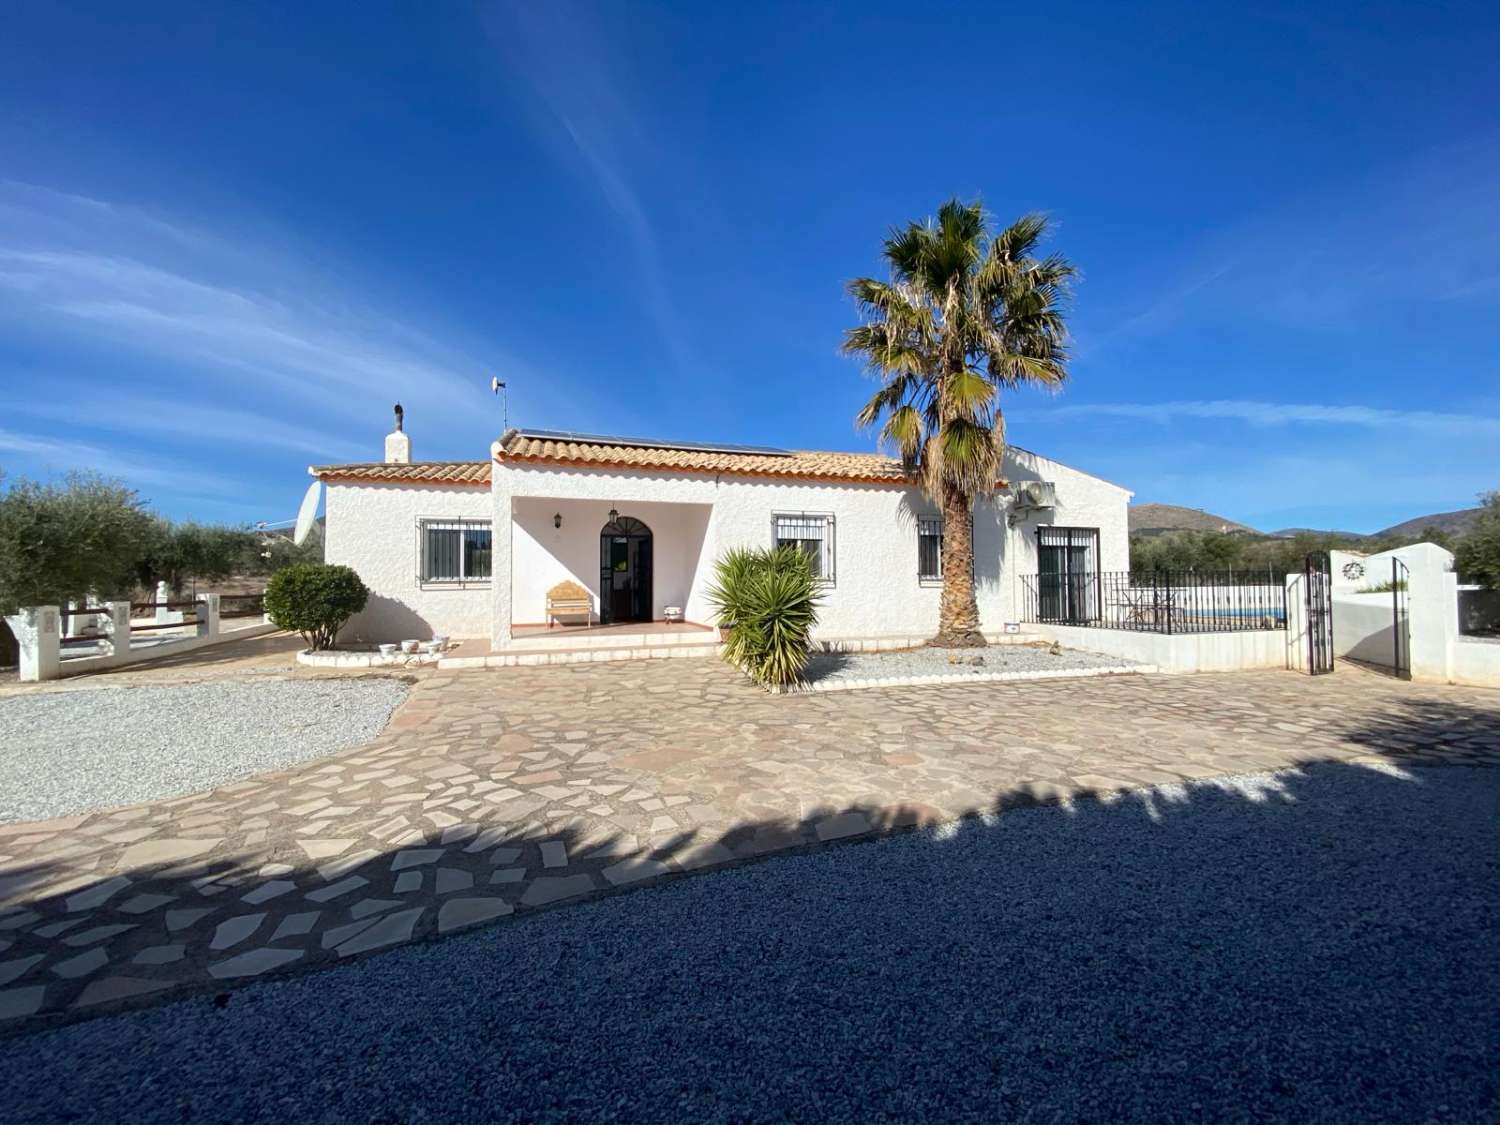 Beautiful 3Bed,2 Bath Villa with swimming pool in lovely setting near Vélez Blanco